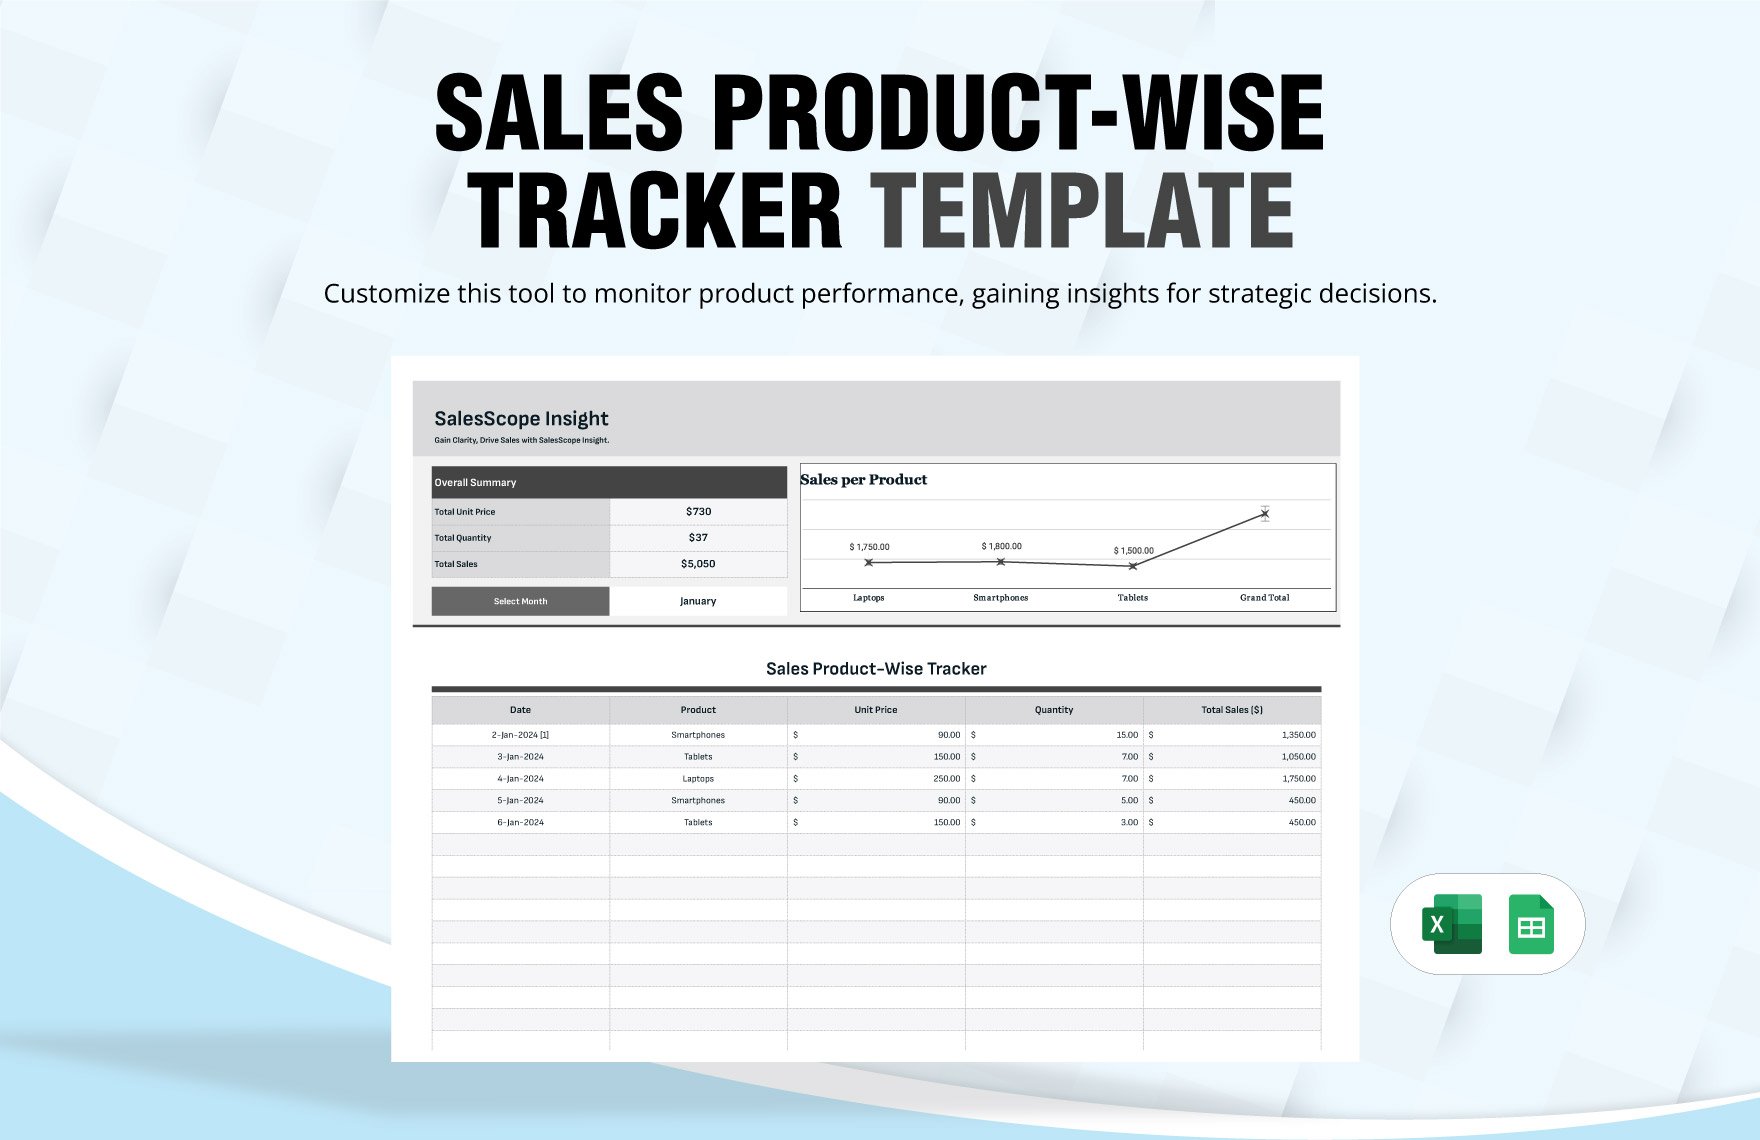 Sales Product-wise Tracker Template